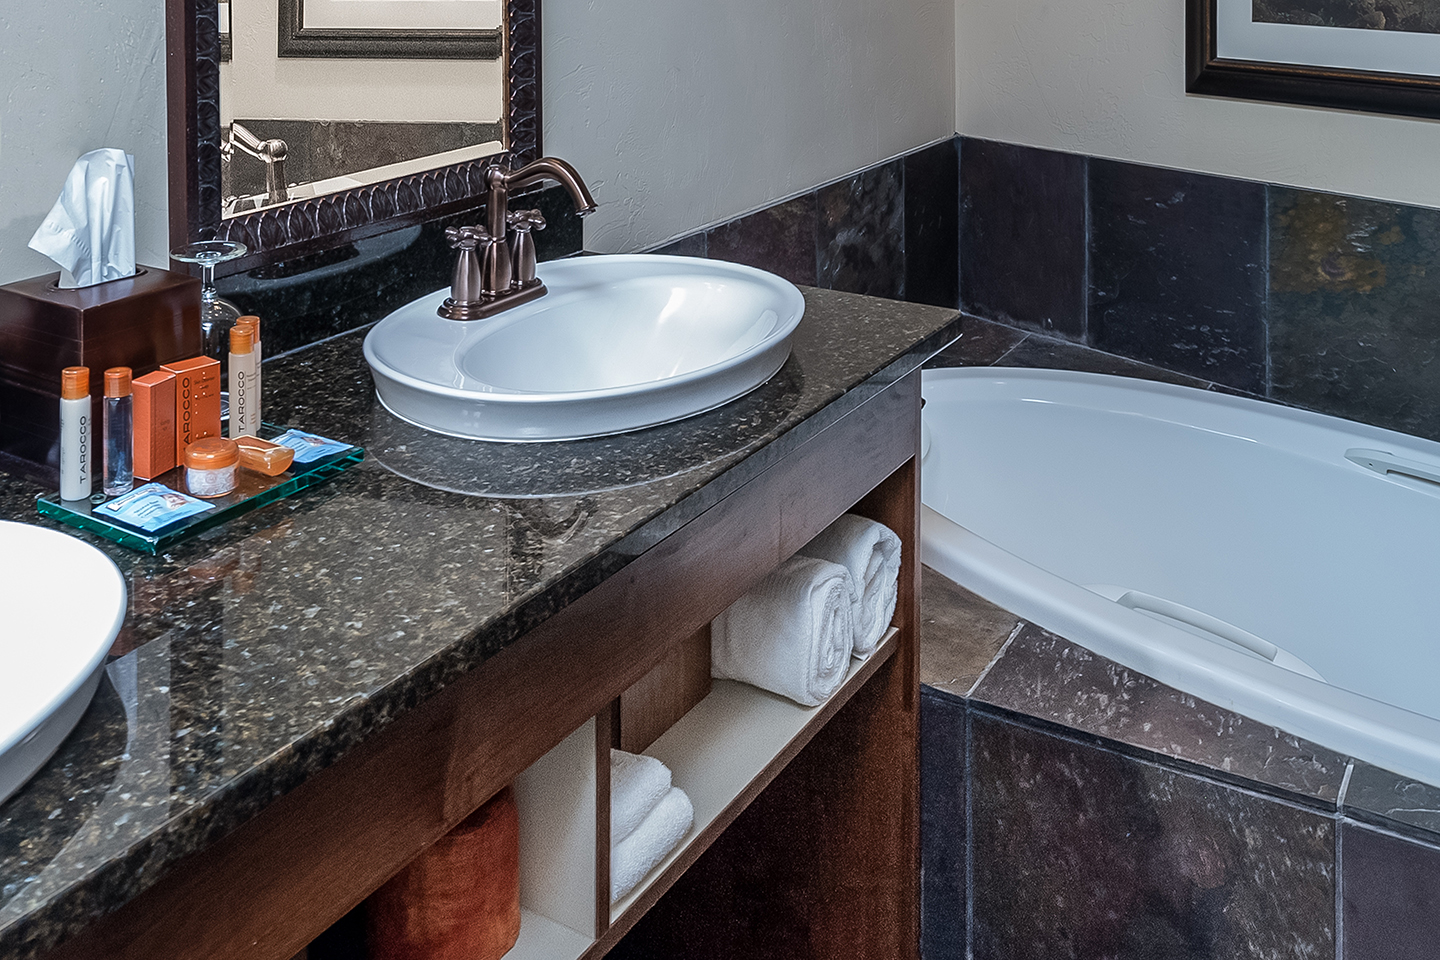 Studio Suites are appointed with our spacious 4-piece bath including double vanity sinks, walk-in shower, and soaking tub.